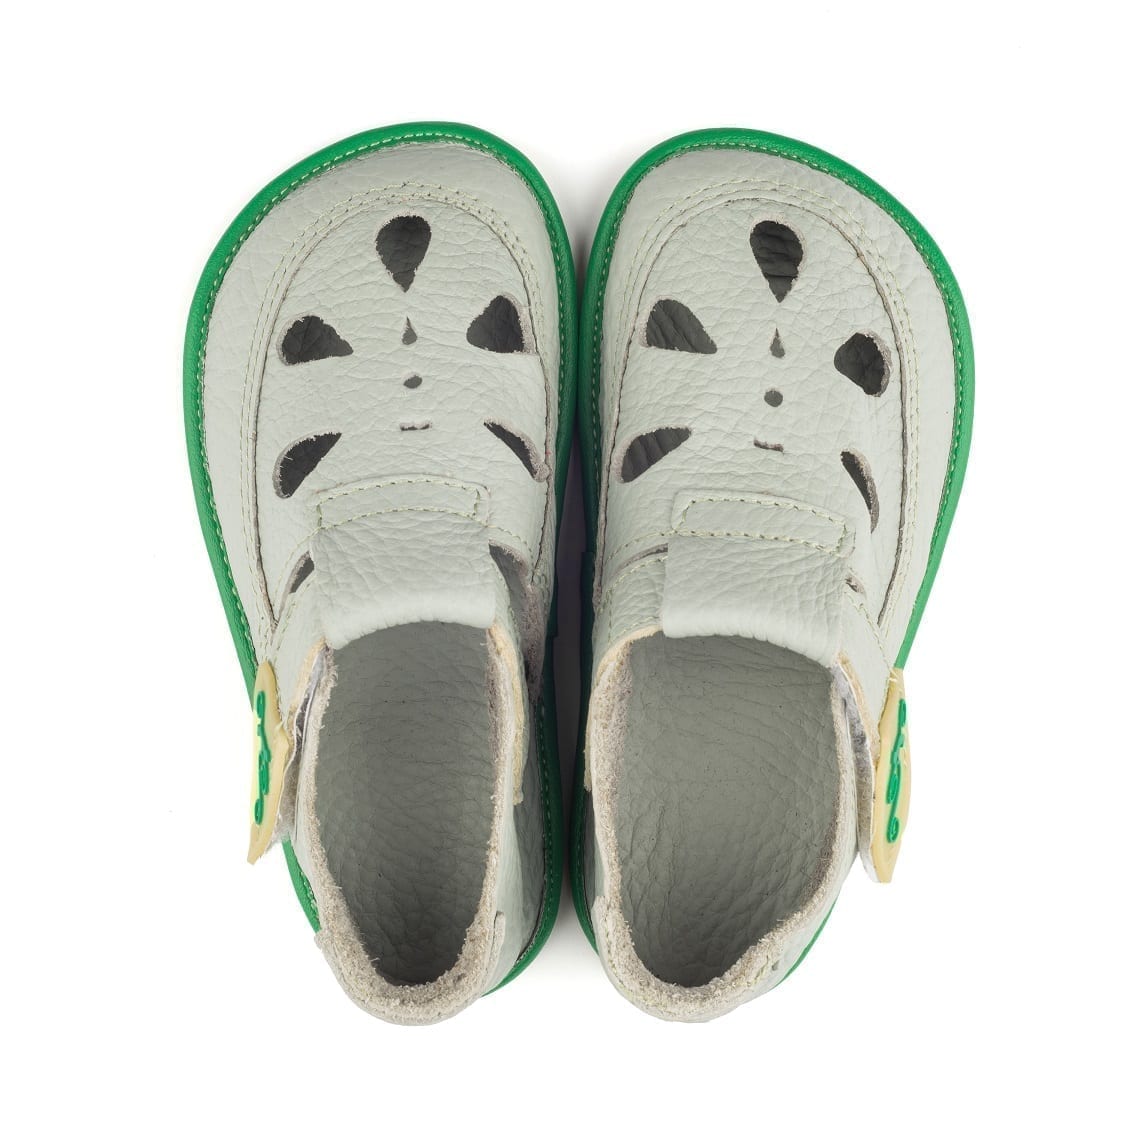 Barefoot shoes for kids COCO MINT - Magical Shoes